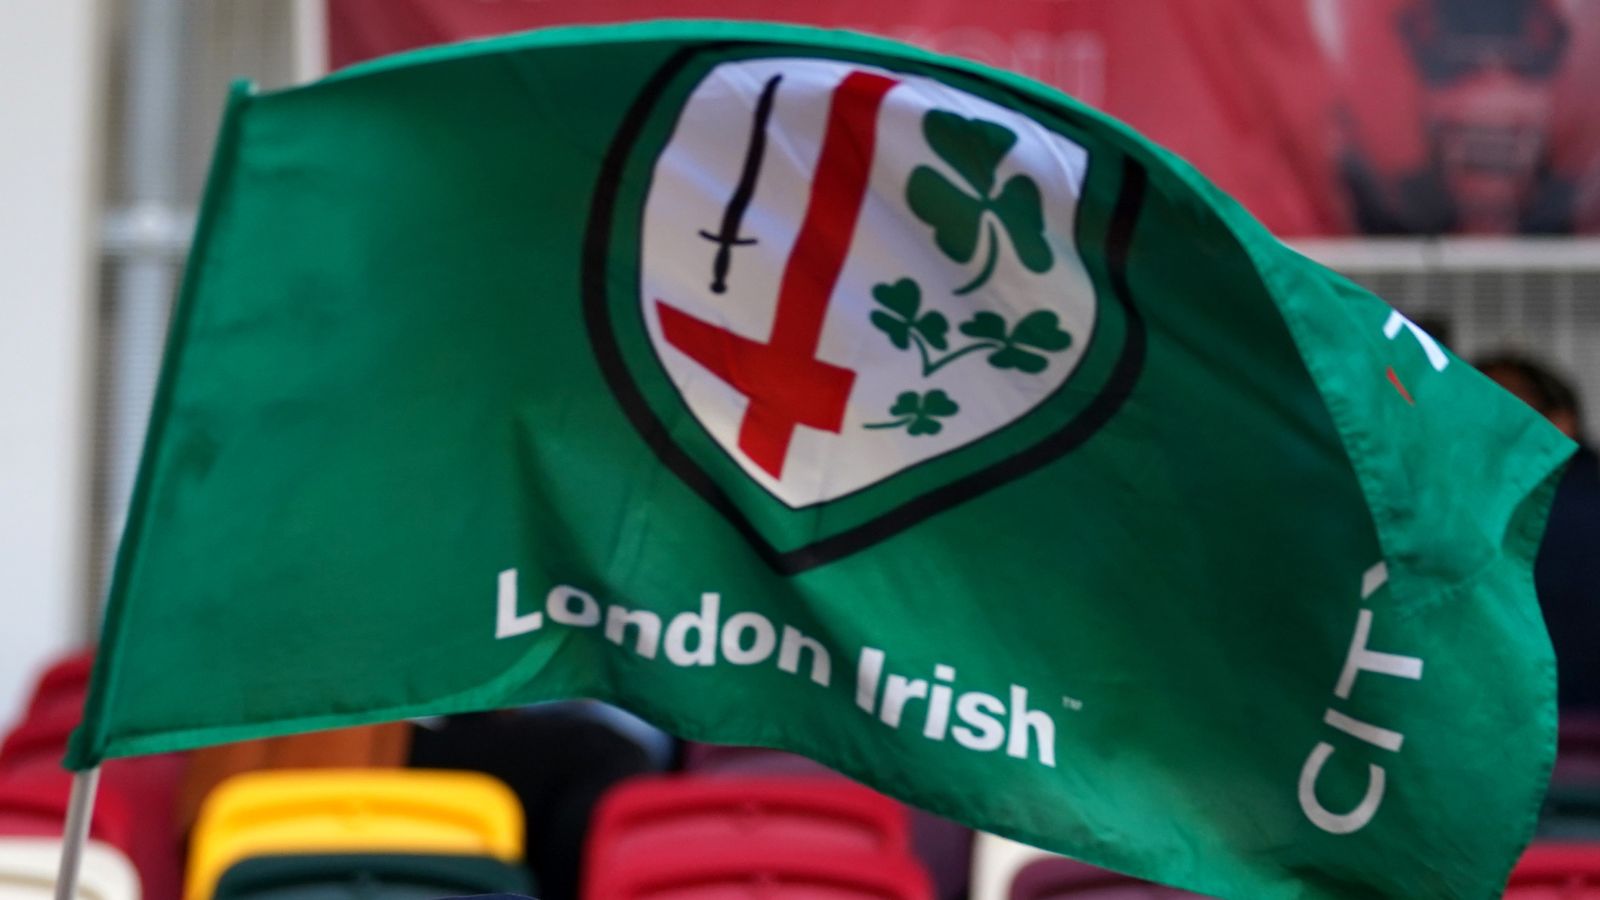 London Irish: German investor edging closer to takeover as conversations with fans scheduled | Rugby Union News